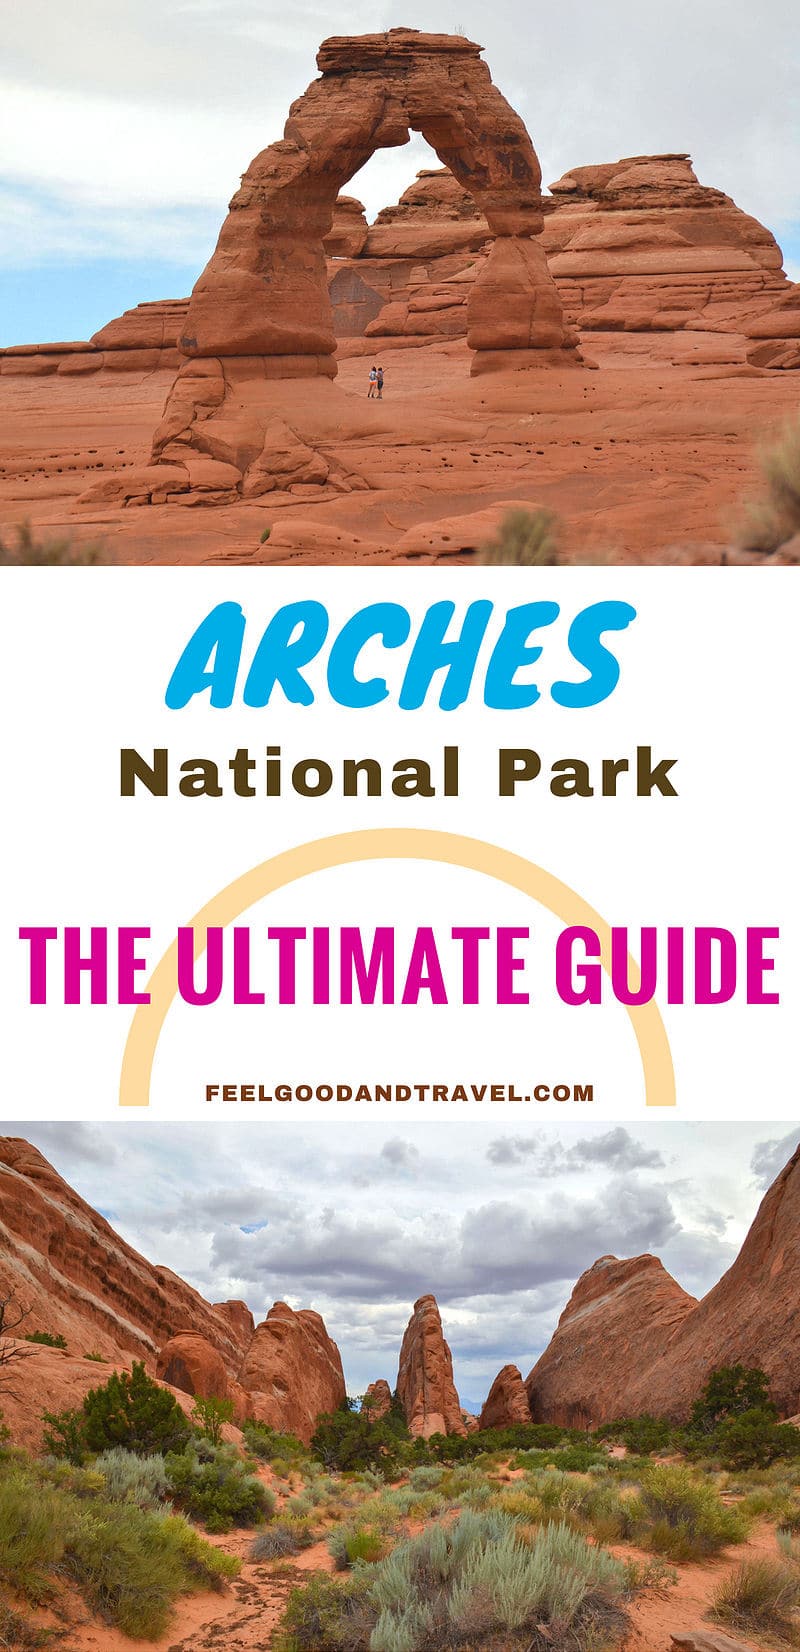 Arches Pinterest Pin